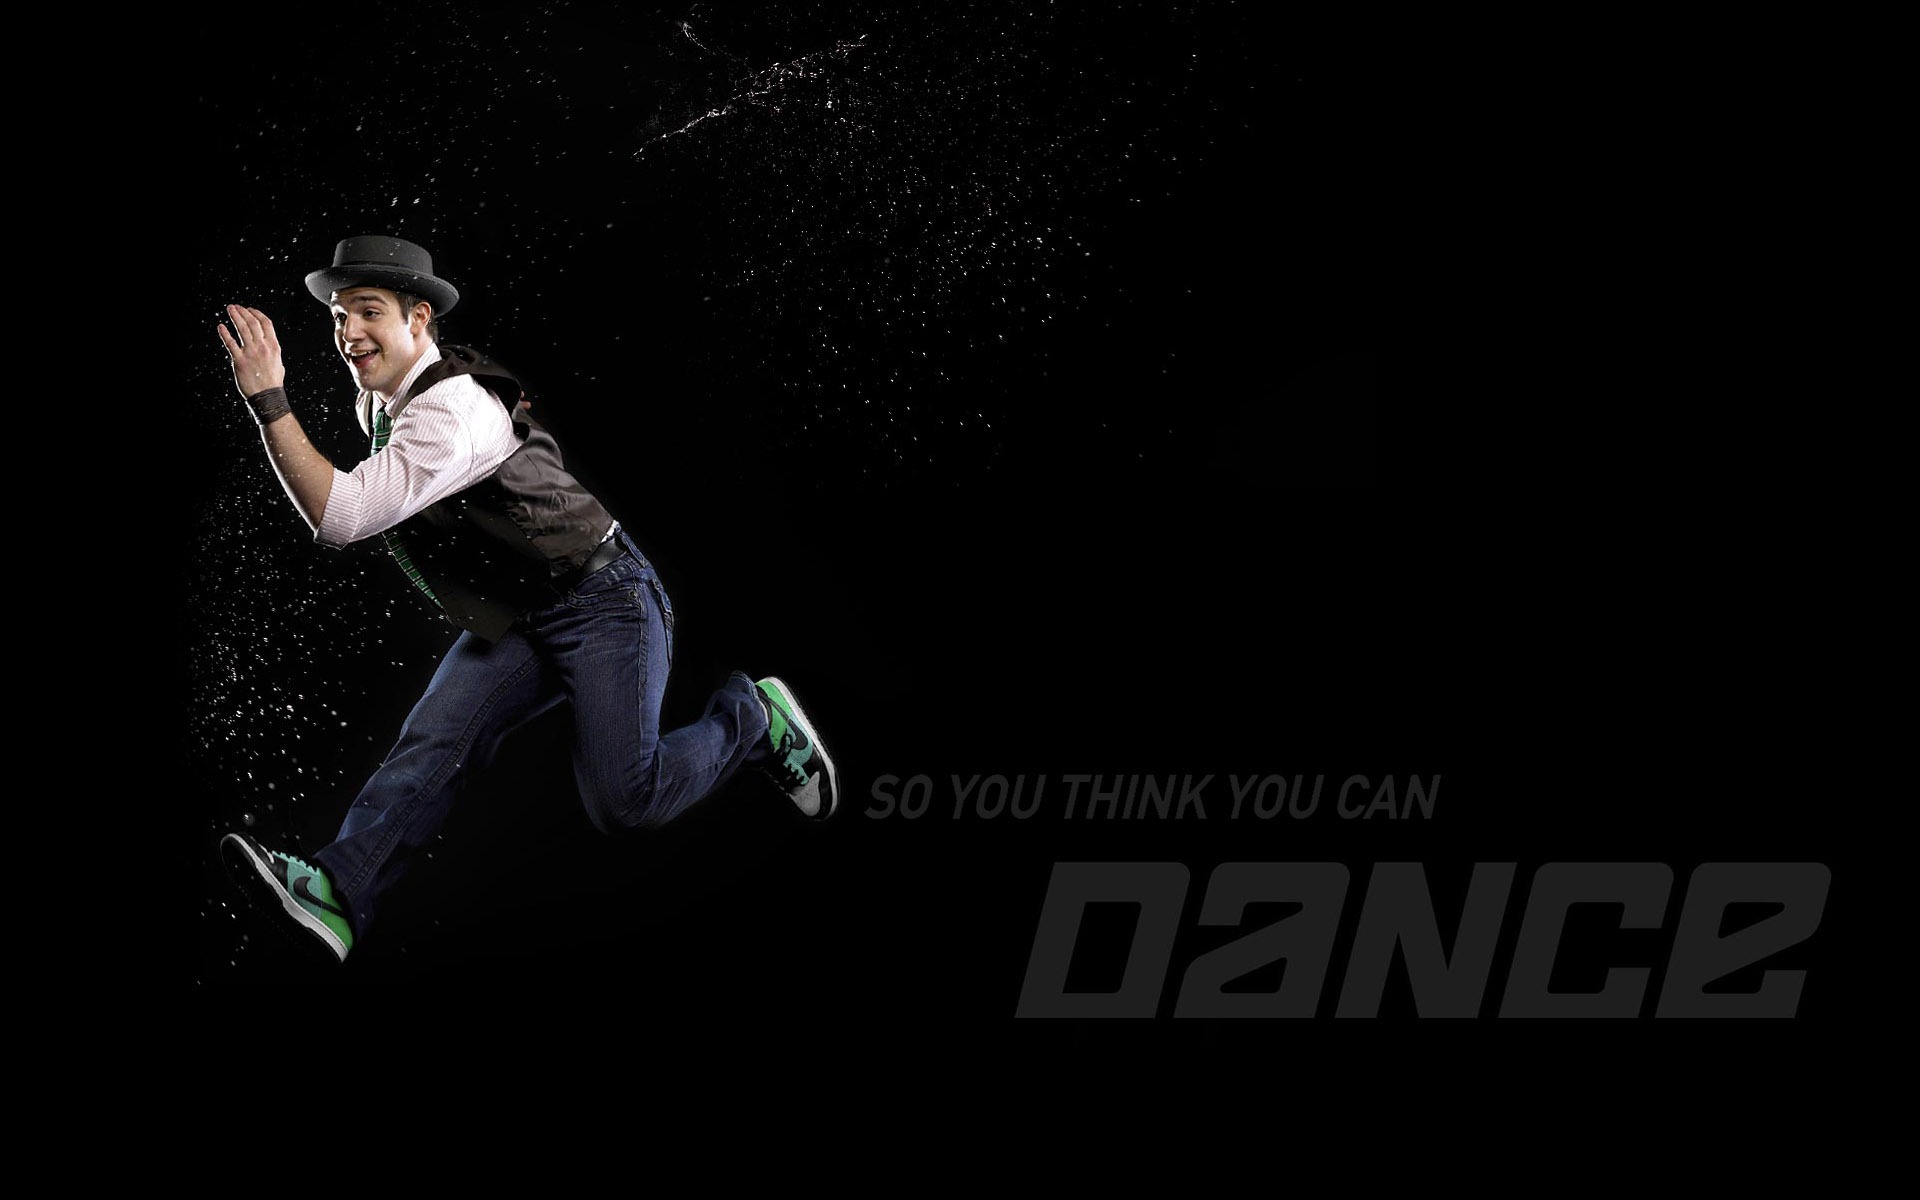 So You Think You Can Dance 舞林爭霸壁紙(一) #14 - 1920x1200